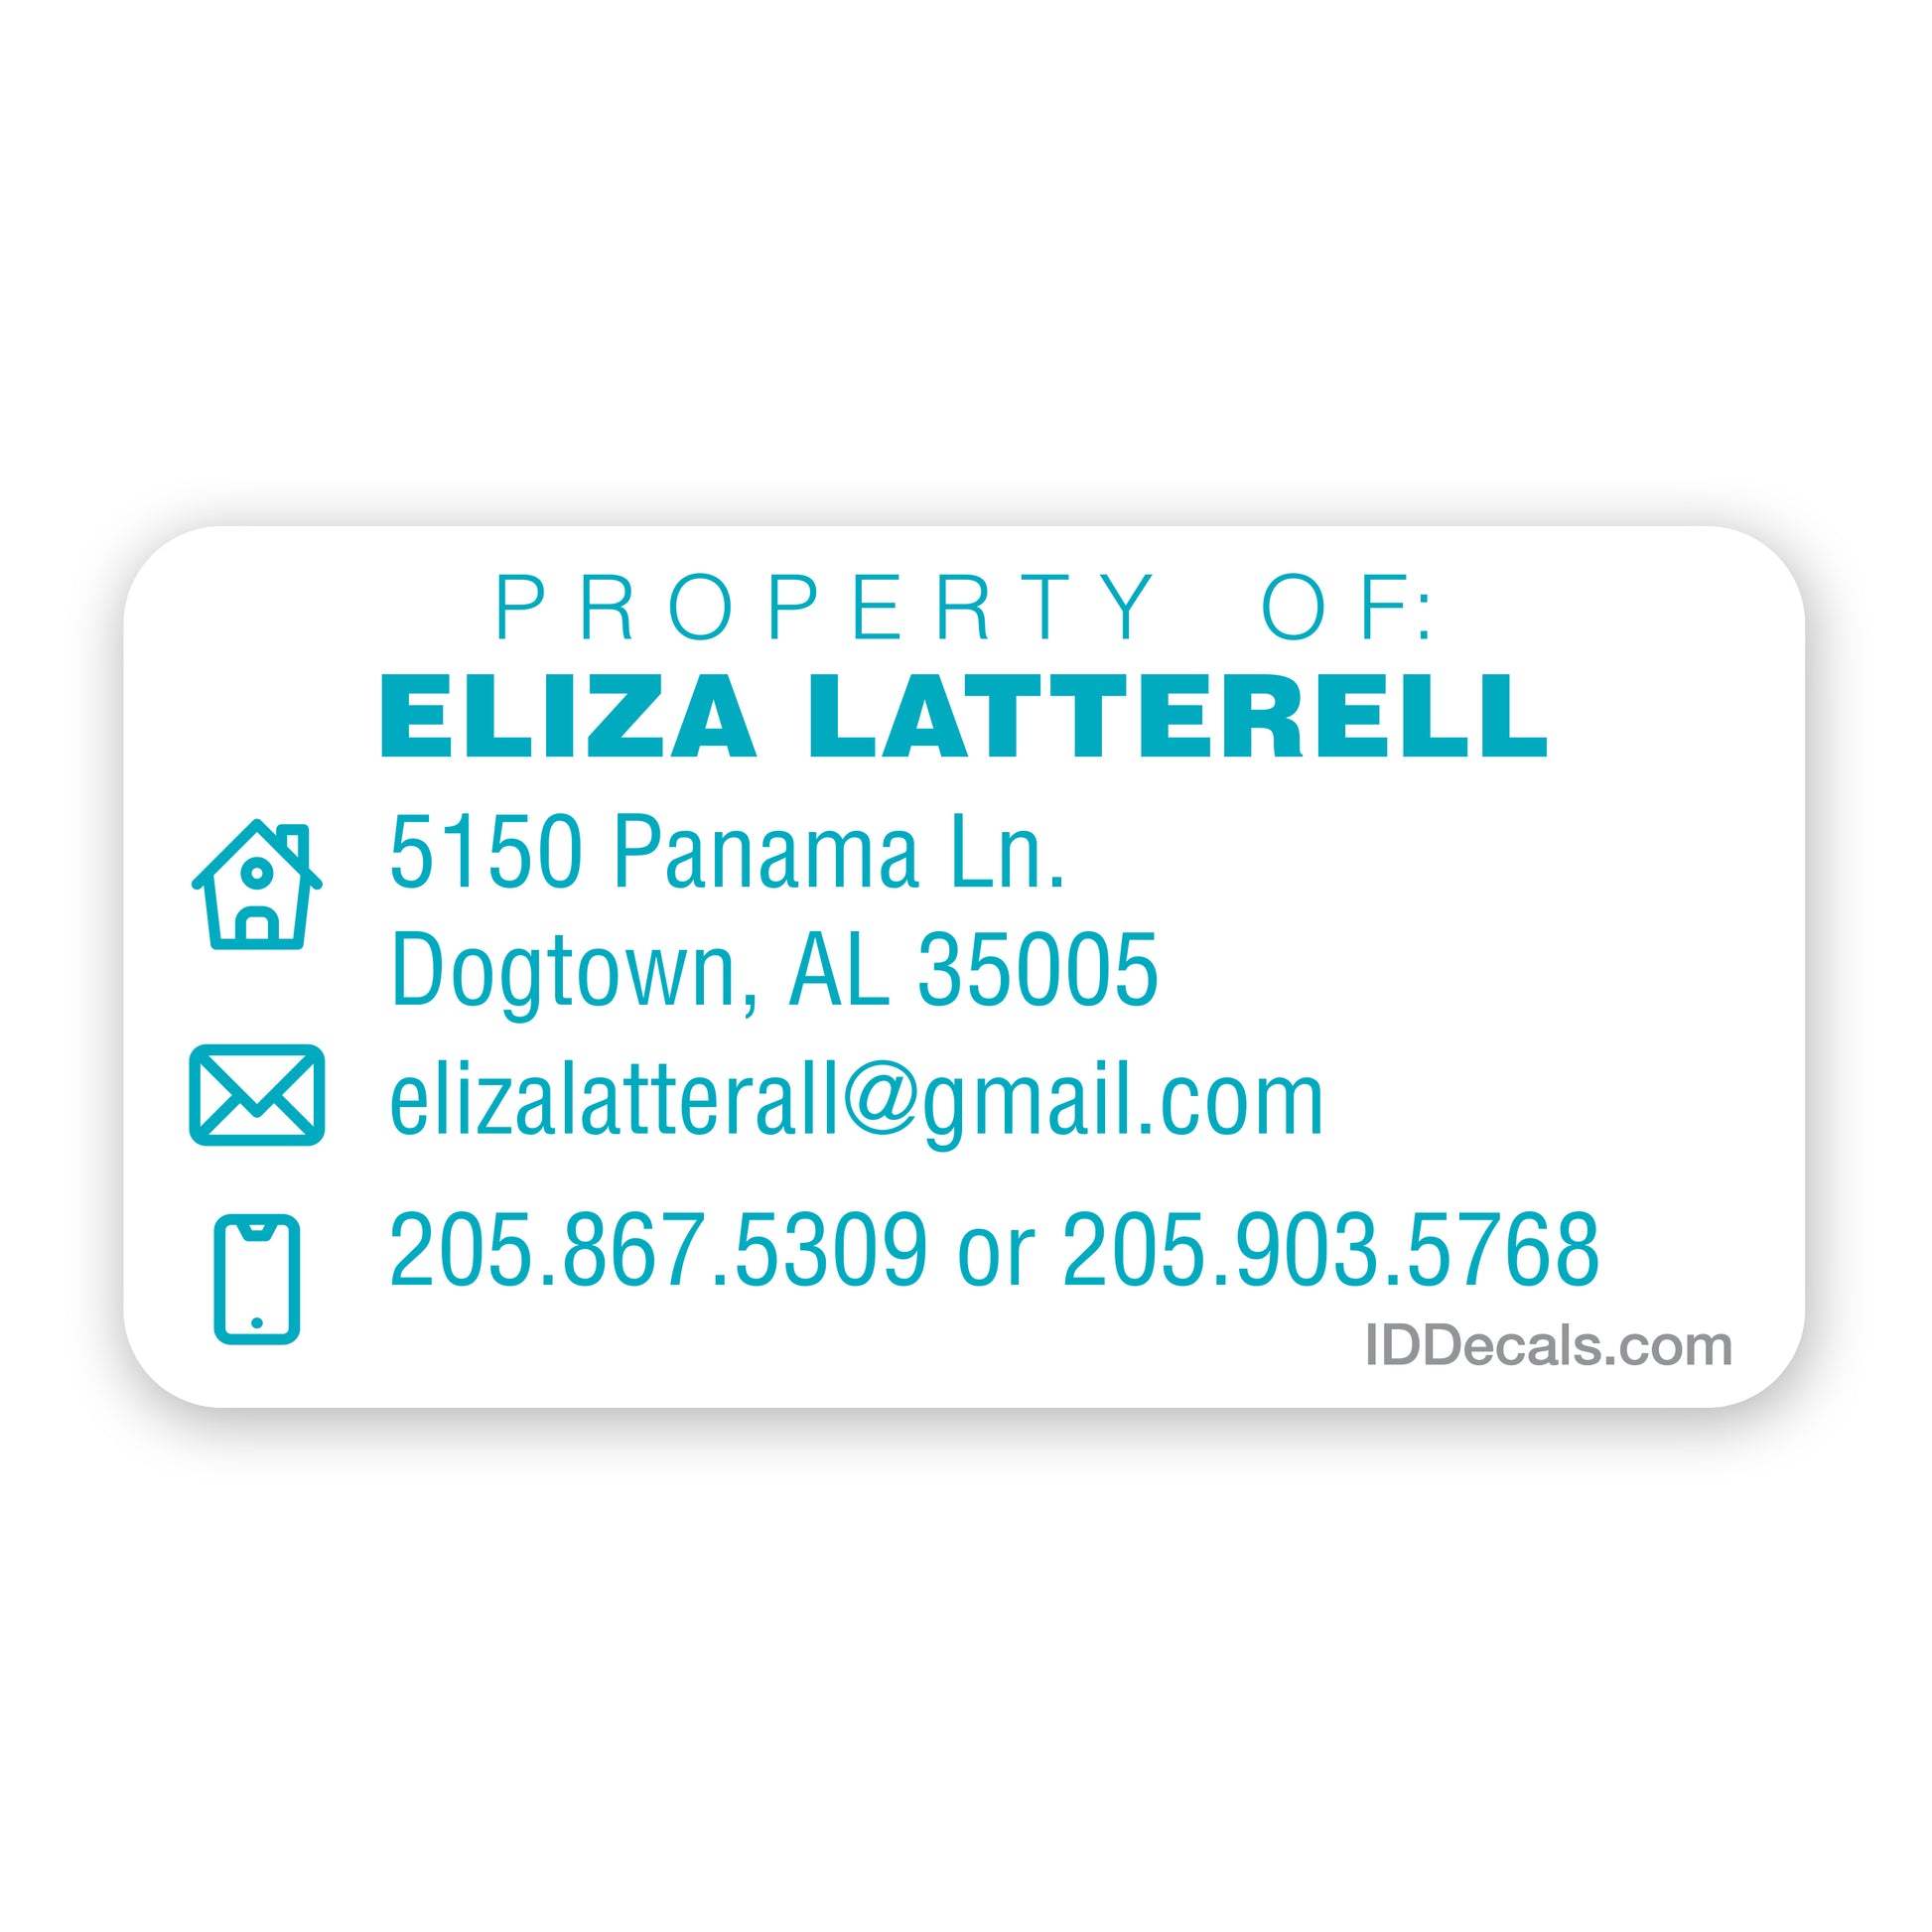 Individual Customized Premium Vinyl Adhesive 'Property Of' Decals - Personalized Name Label for Belongings, White Background with Colored Text